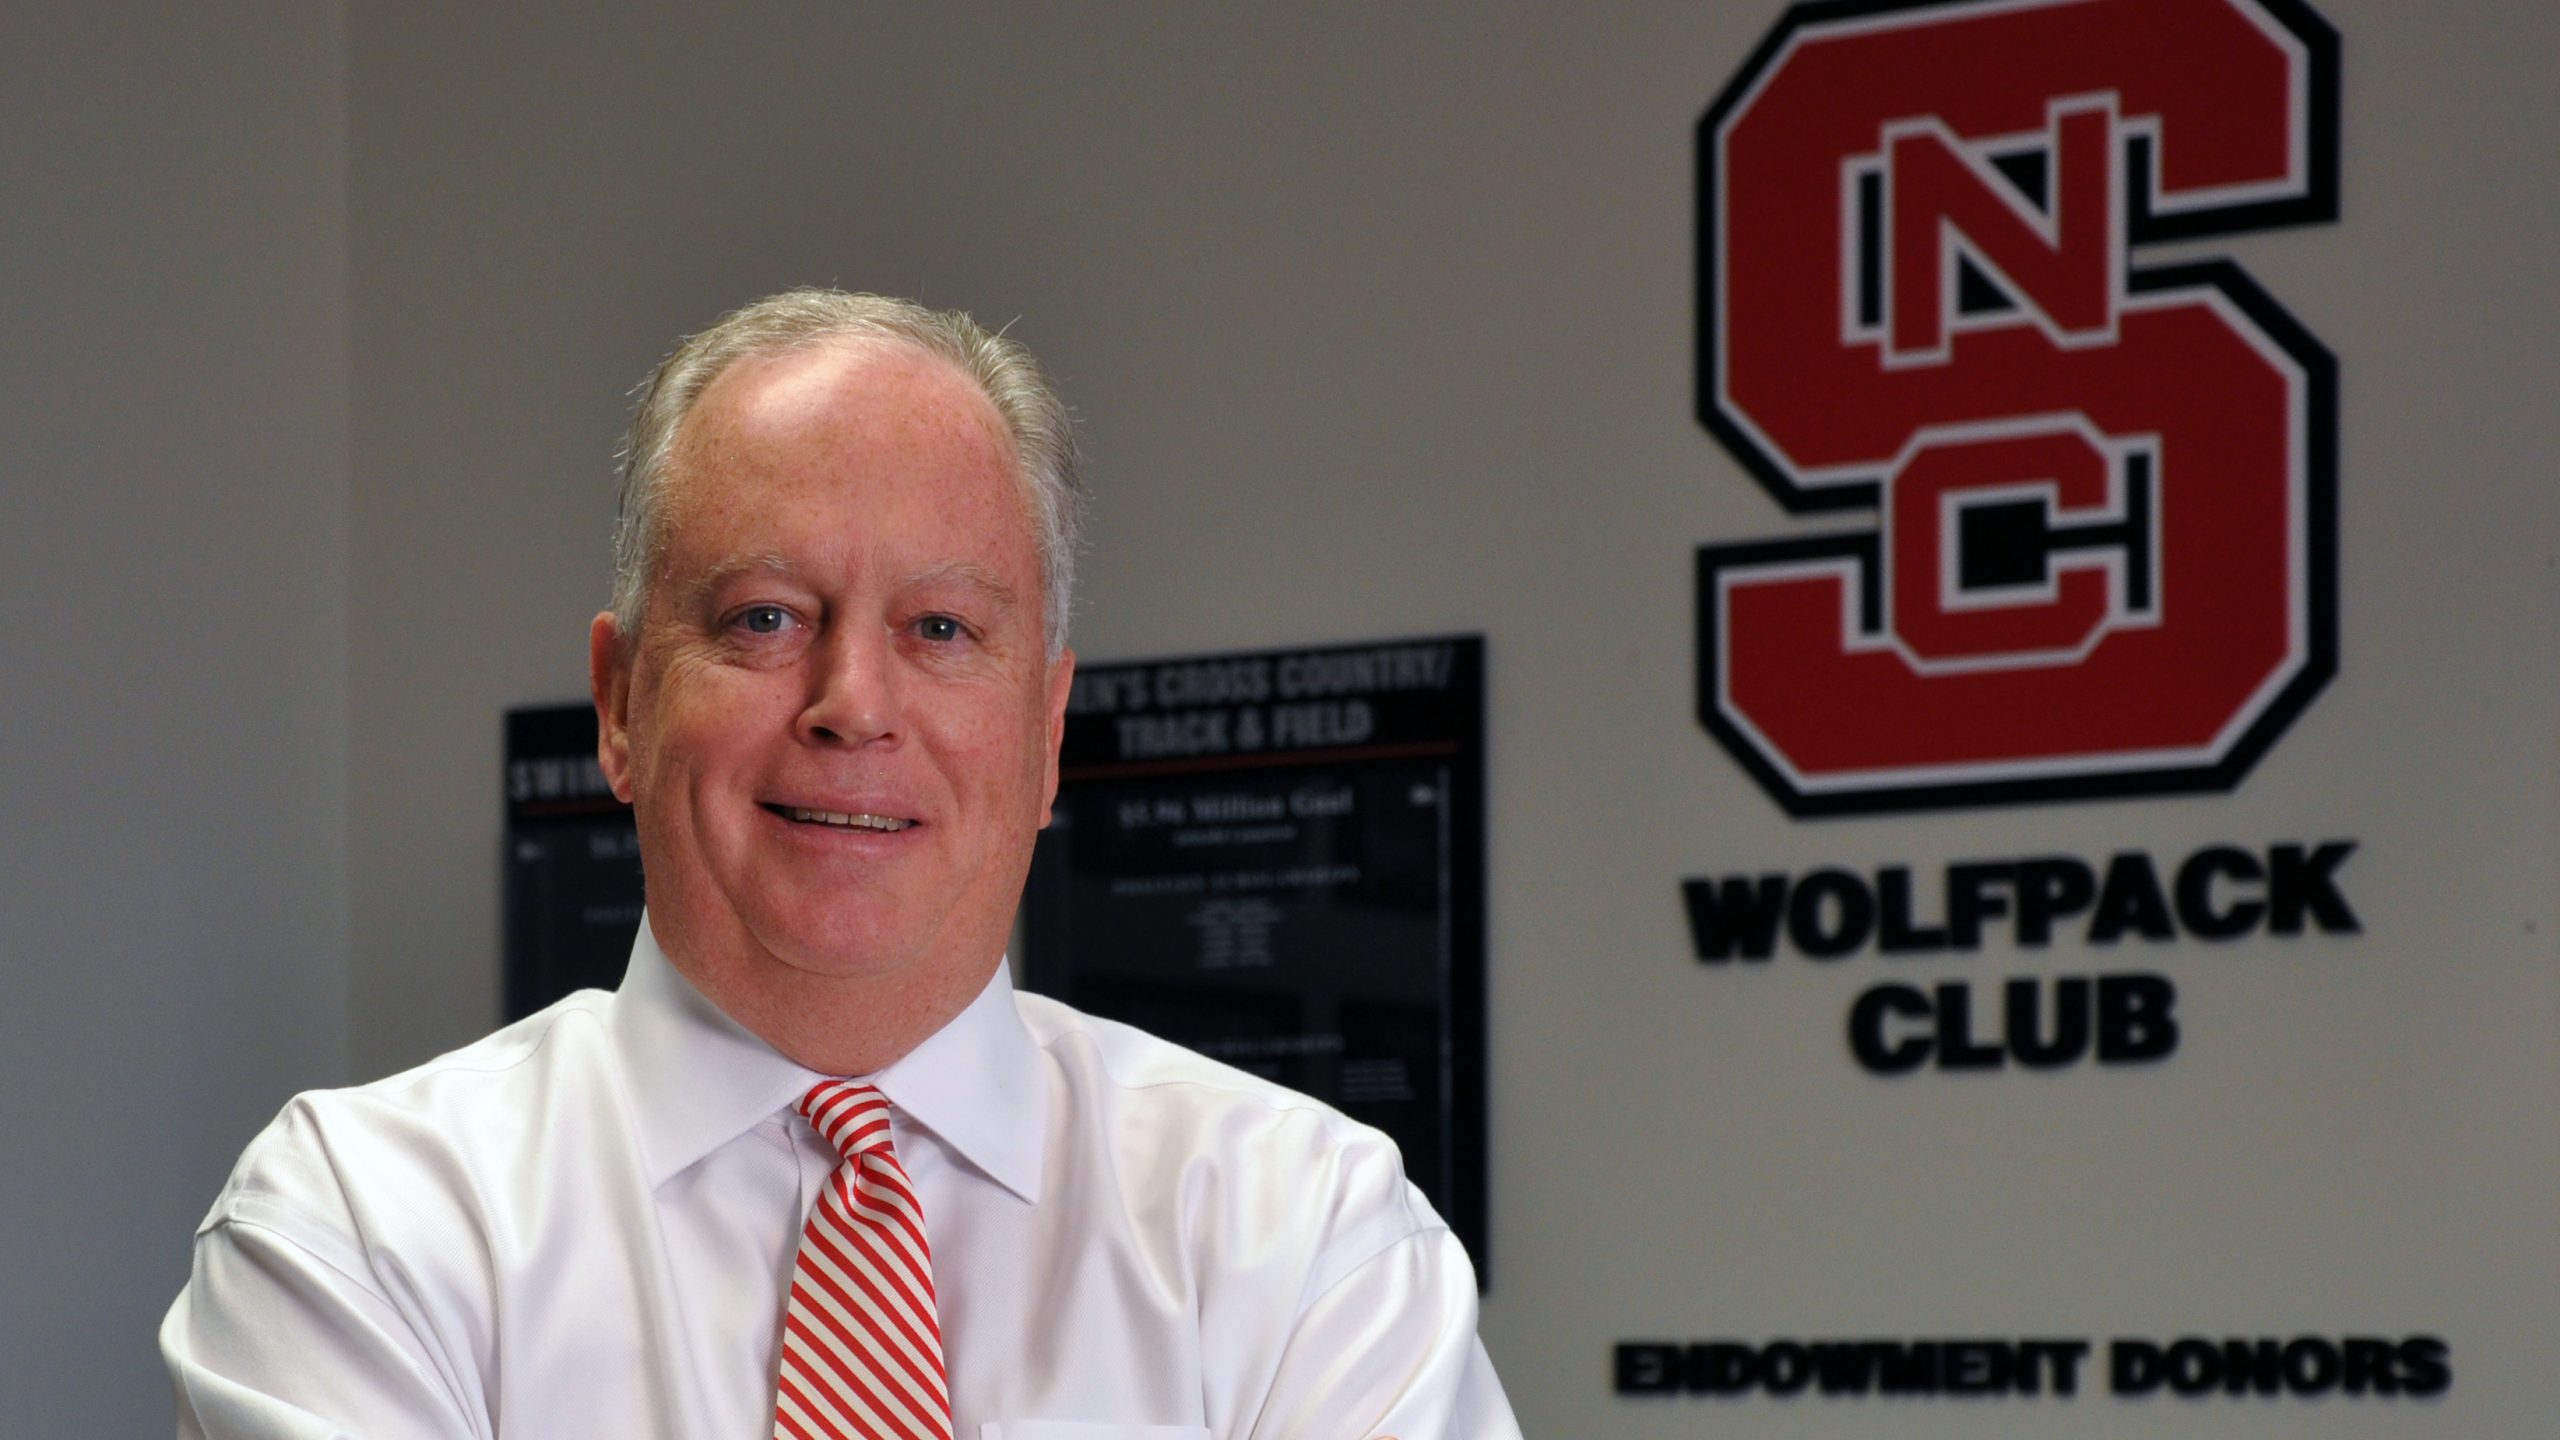 Bobby Purcell posing in front of Wolfpack Club sign